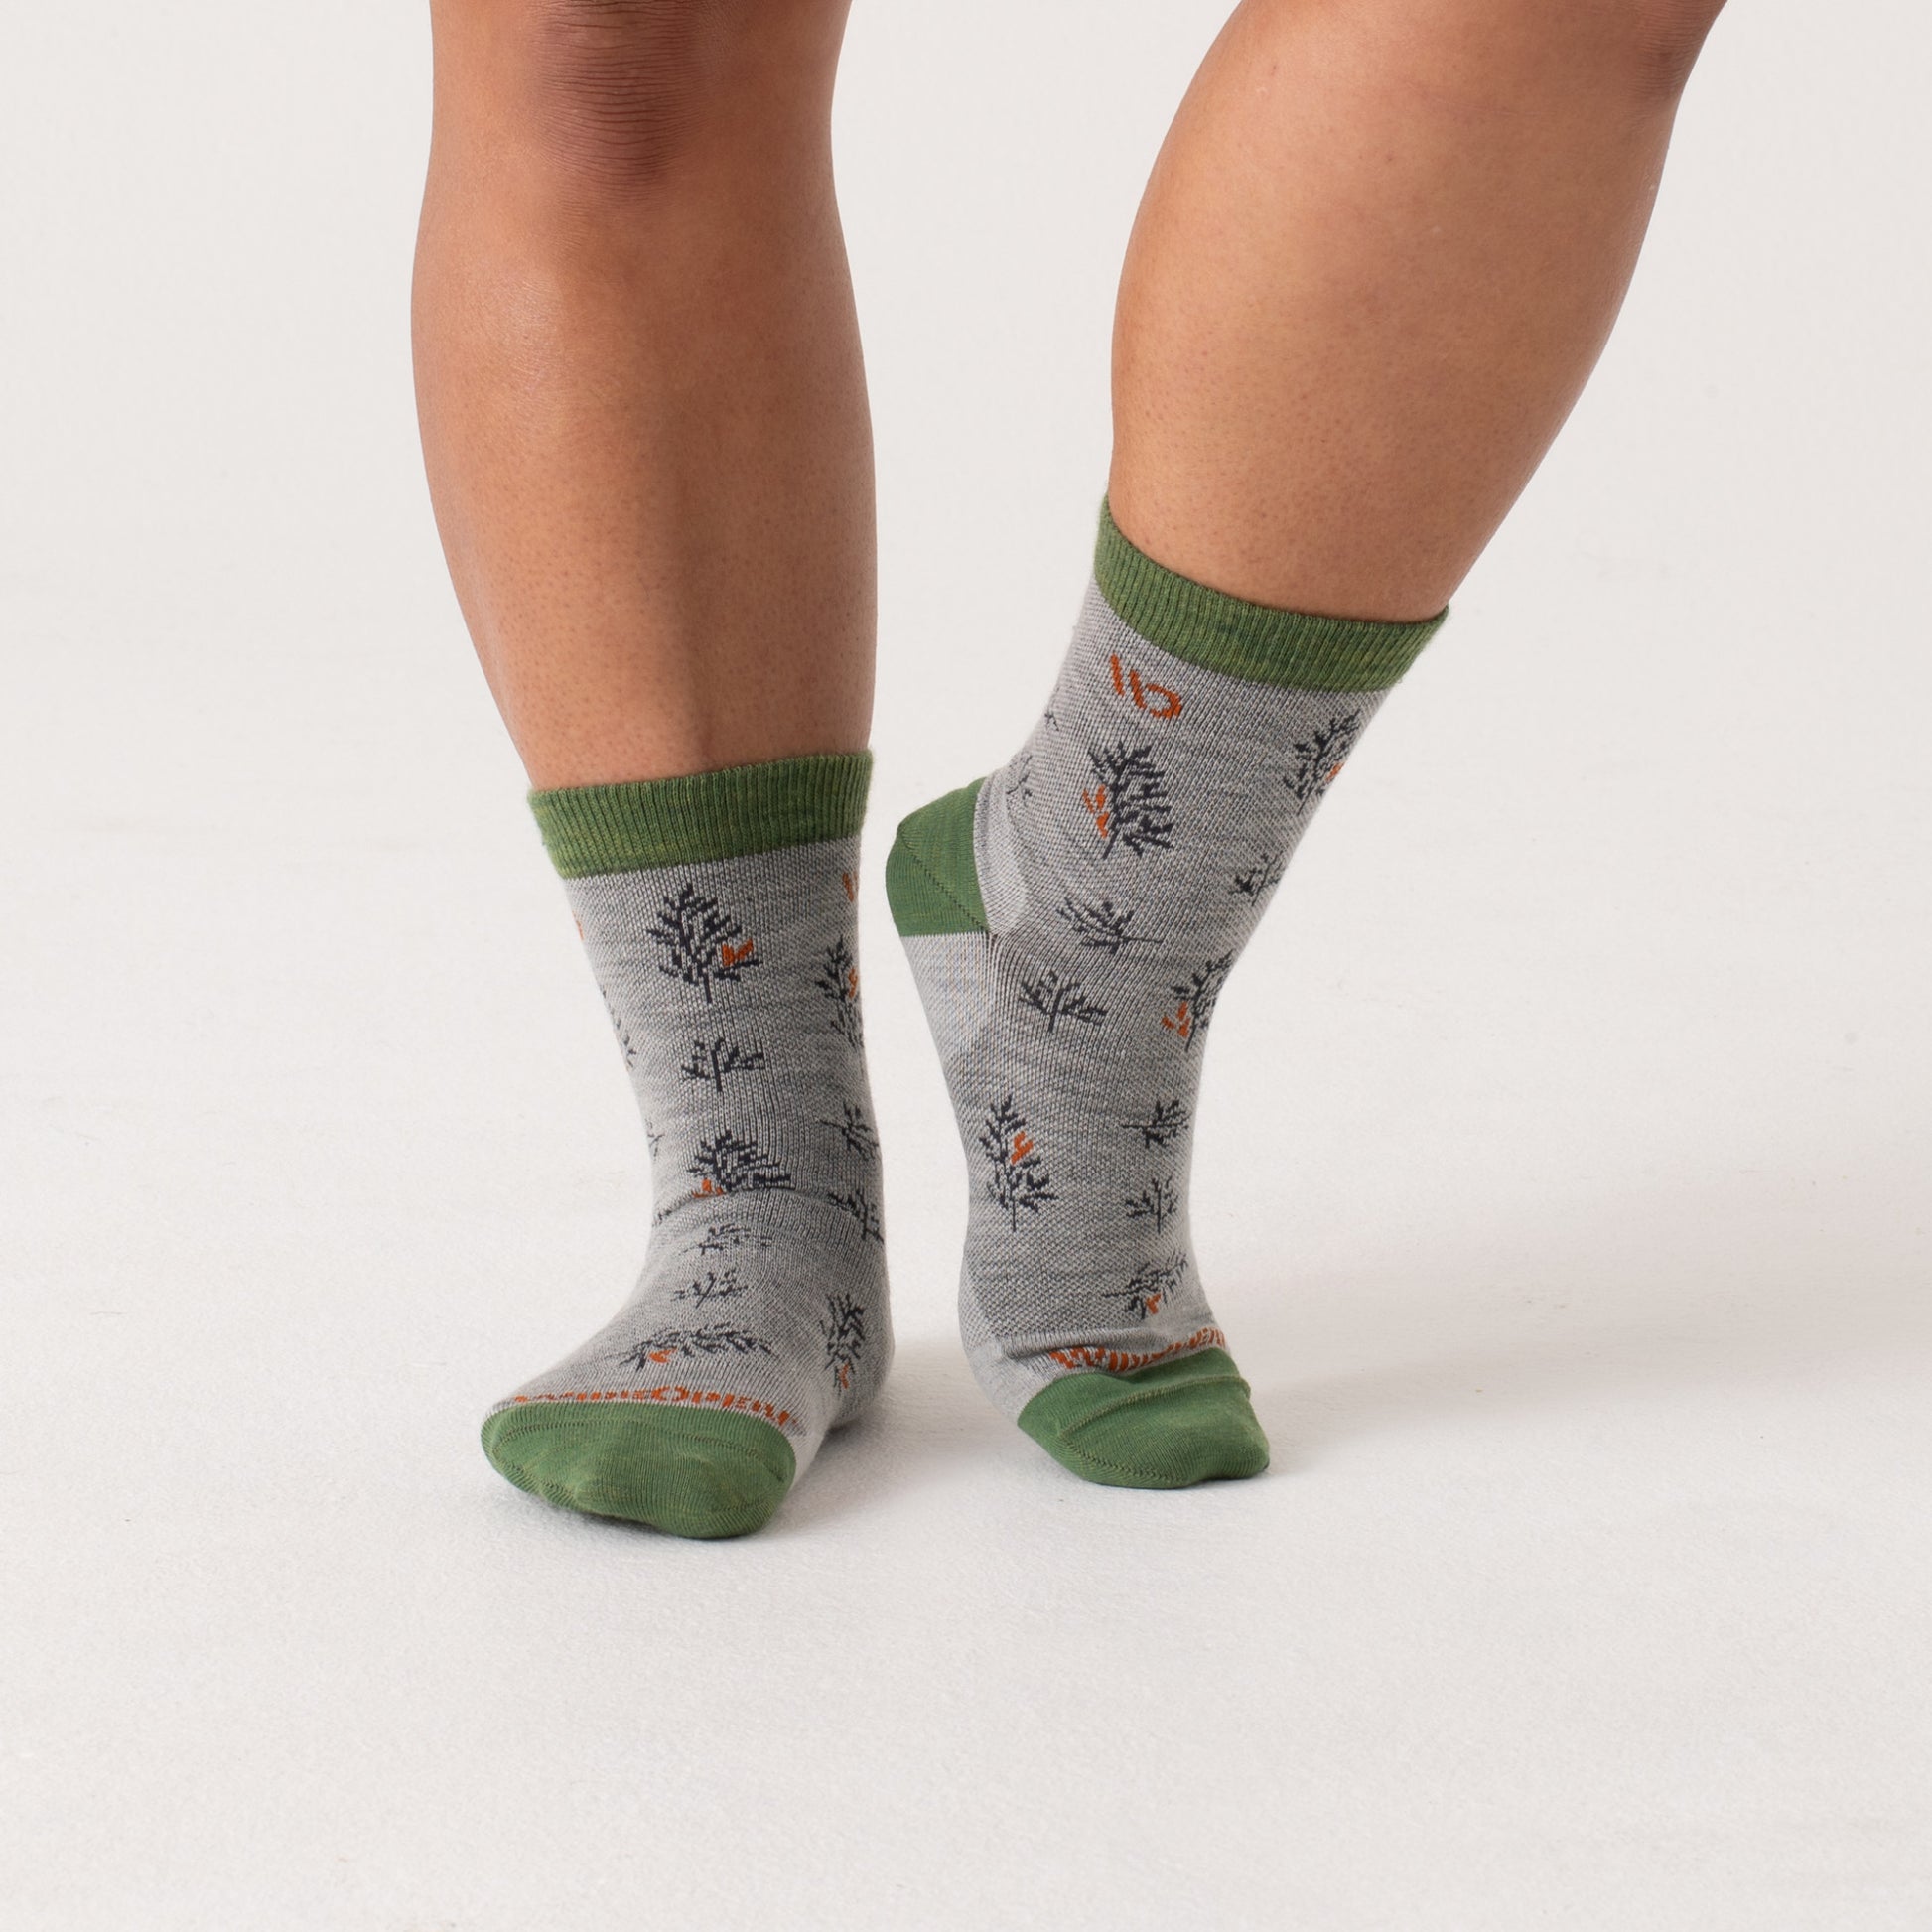 Micro Crew on model with green heel/toe/cuff, gray body and navy design --Light Gray